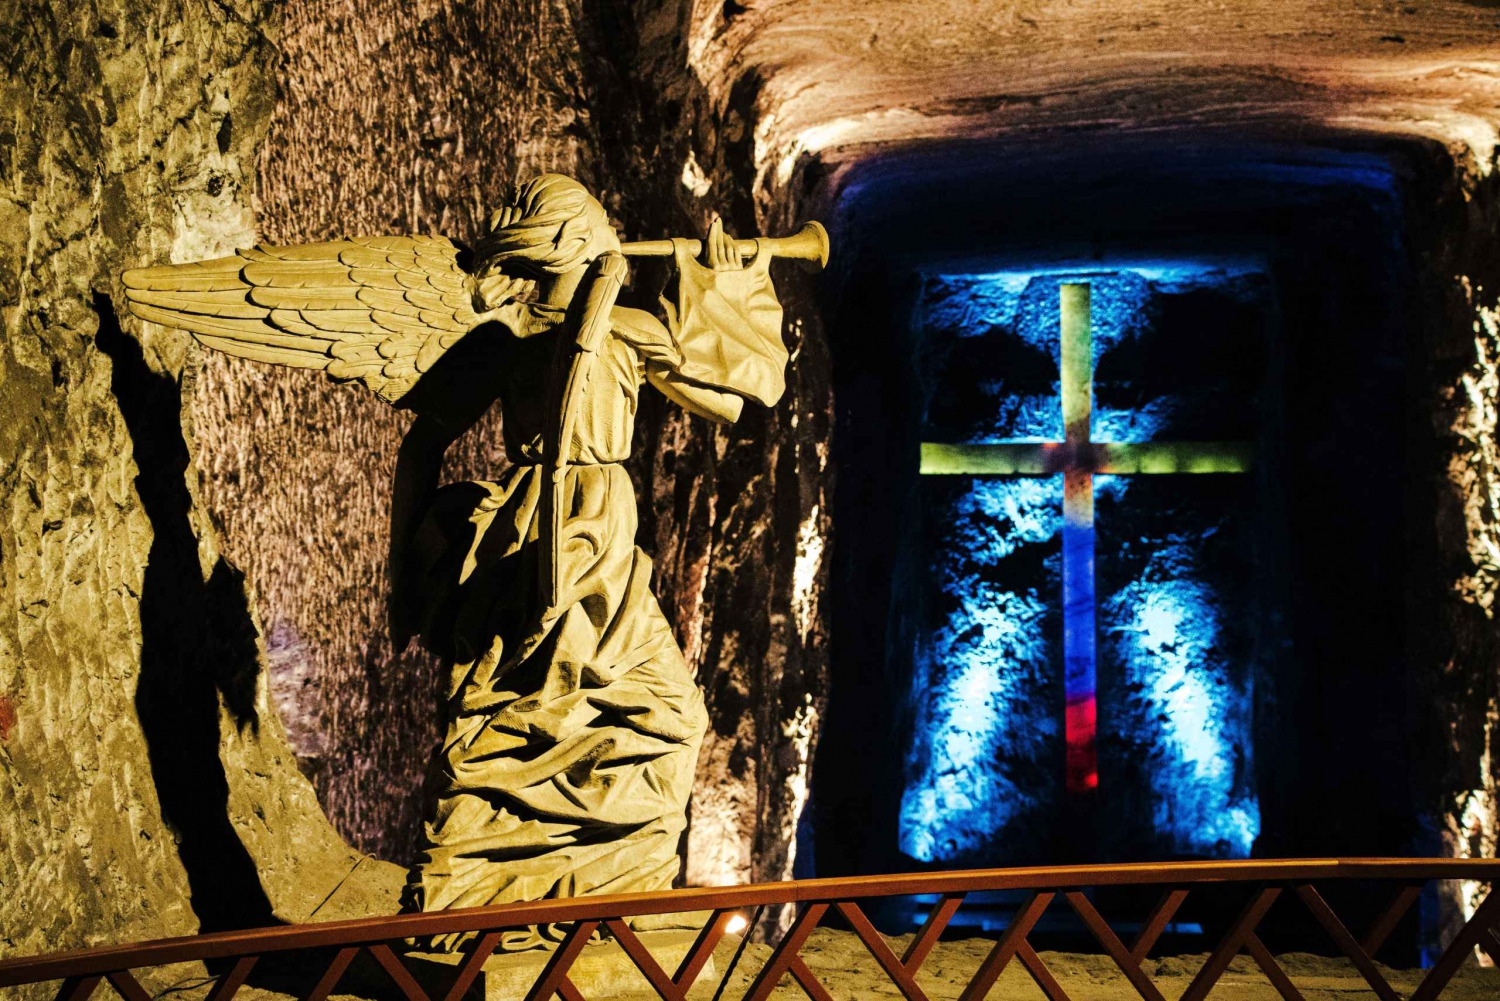 Foreign adult entrance Zipaquira salt cathedral ticket